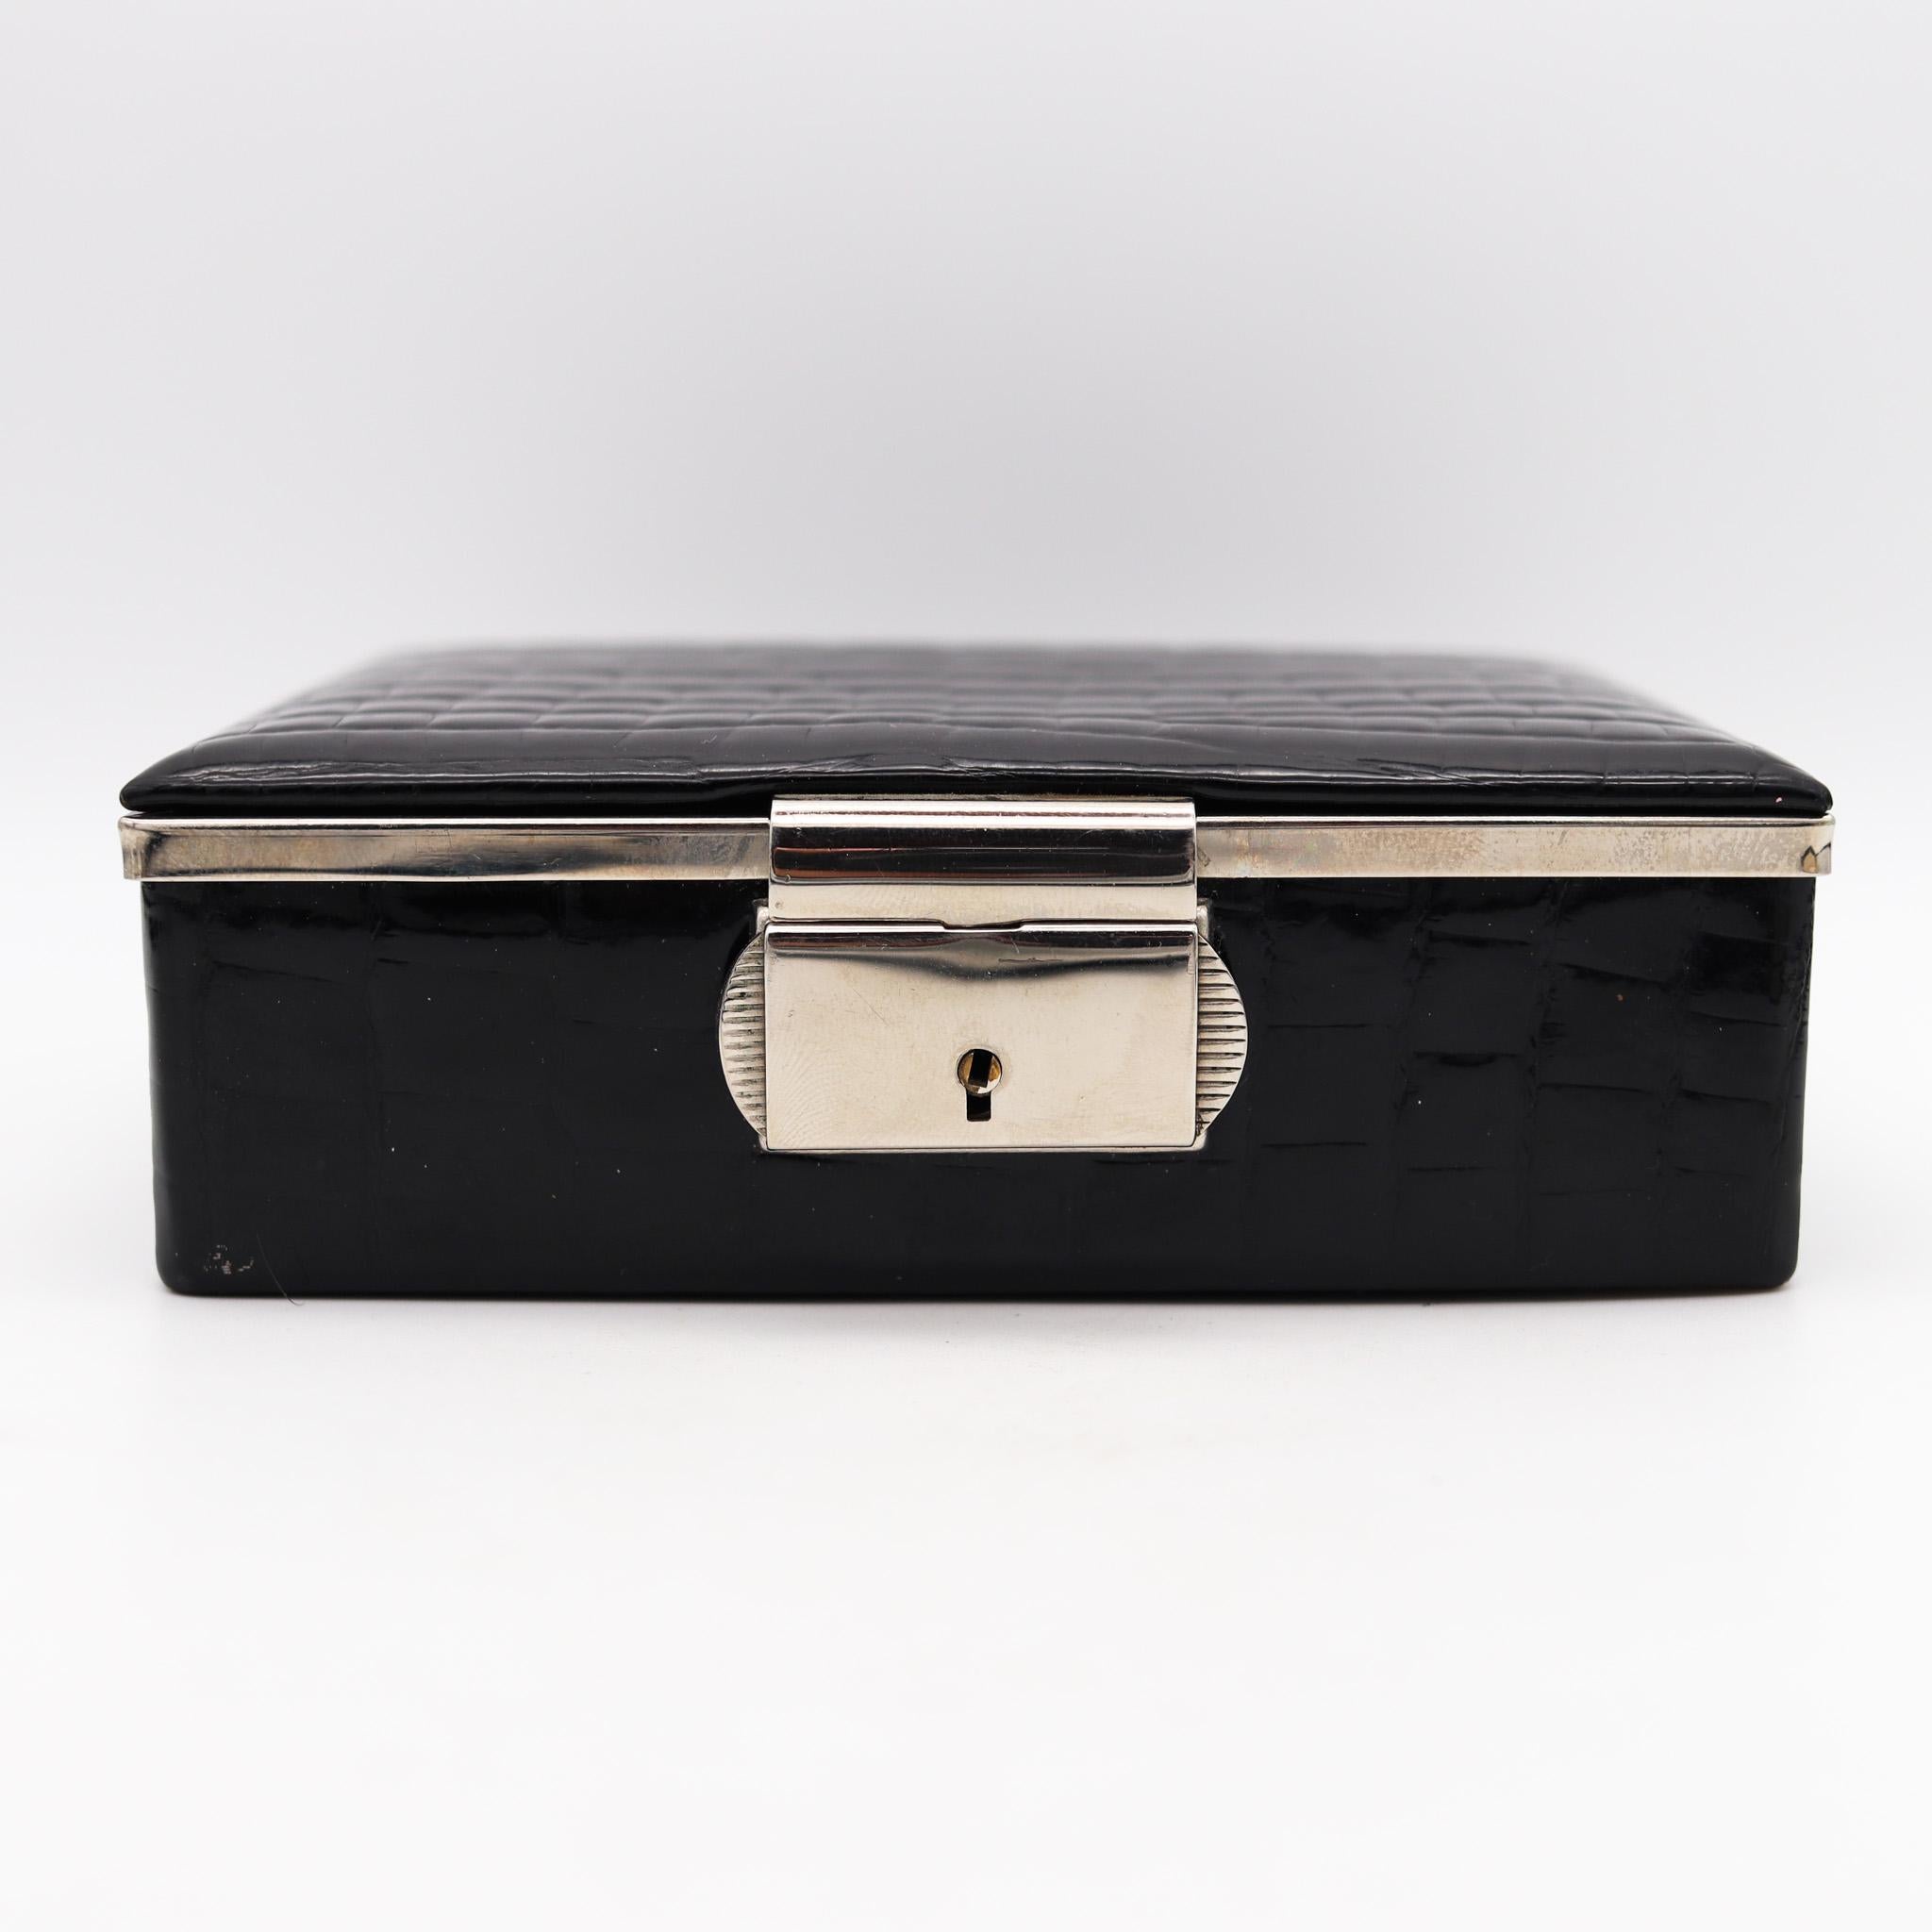 Late 20th Century Alfred Dunhill Germany 1990 Decorative Desk Box In Black Leather & Chromed Steel For Sale